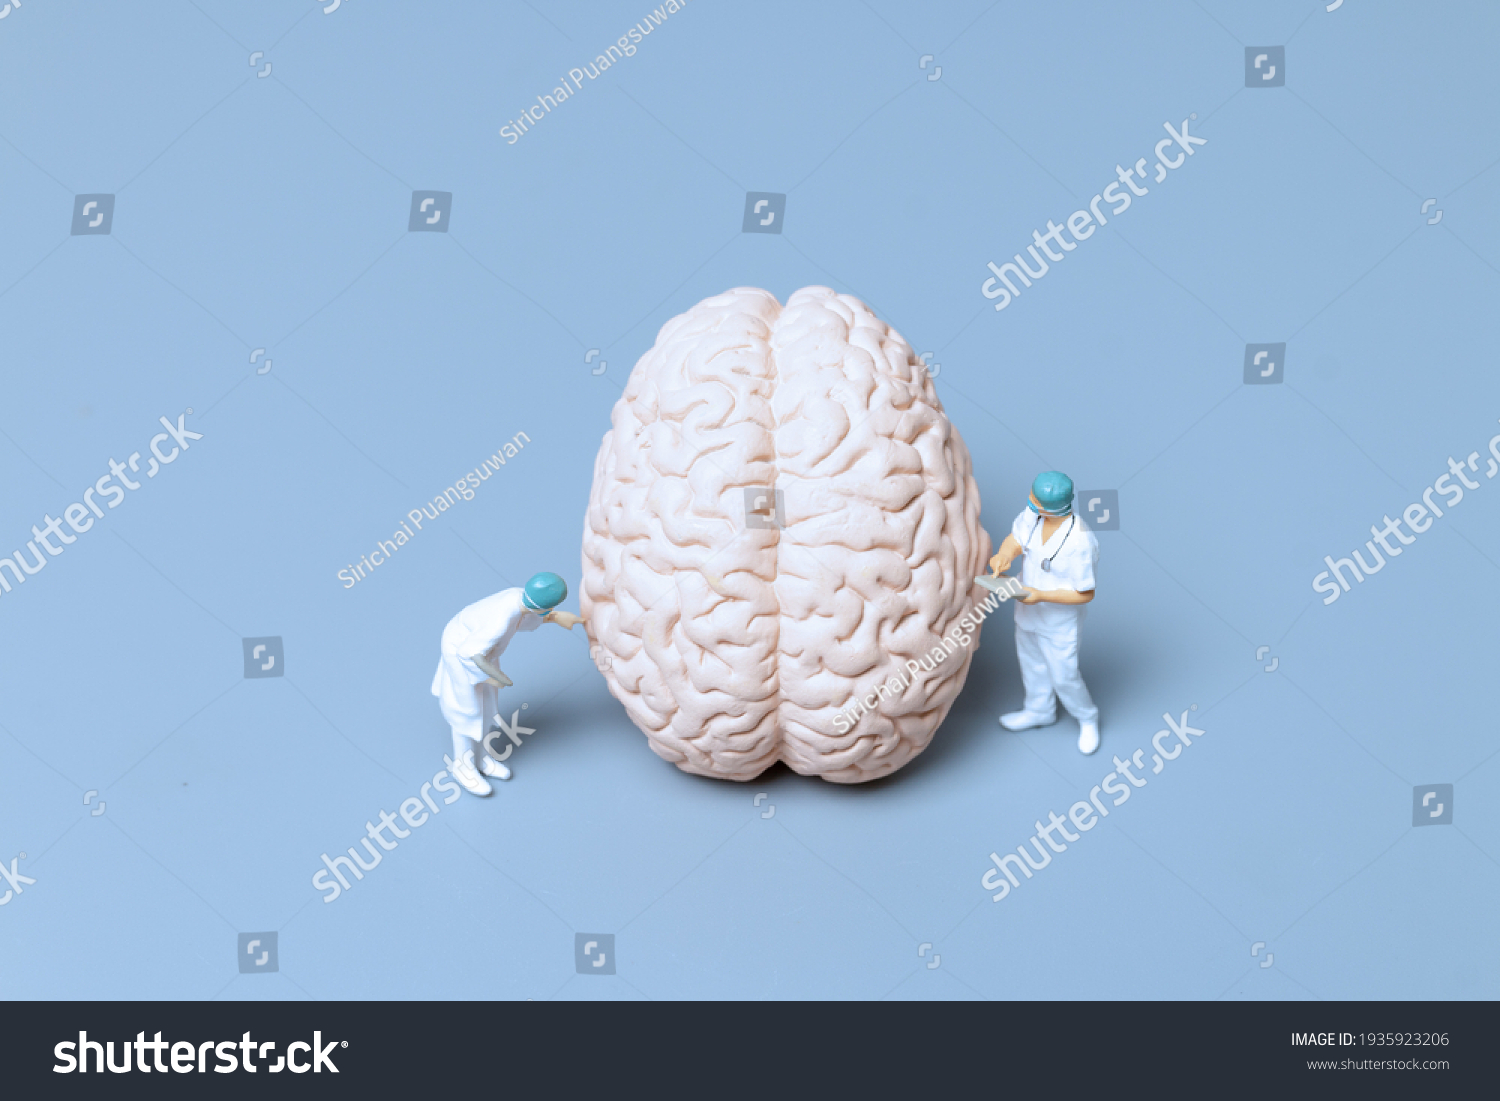 Miniature Doctor checking and analysis alzheimer's disease and dementia of brain, Science and medicine concept #1935923206